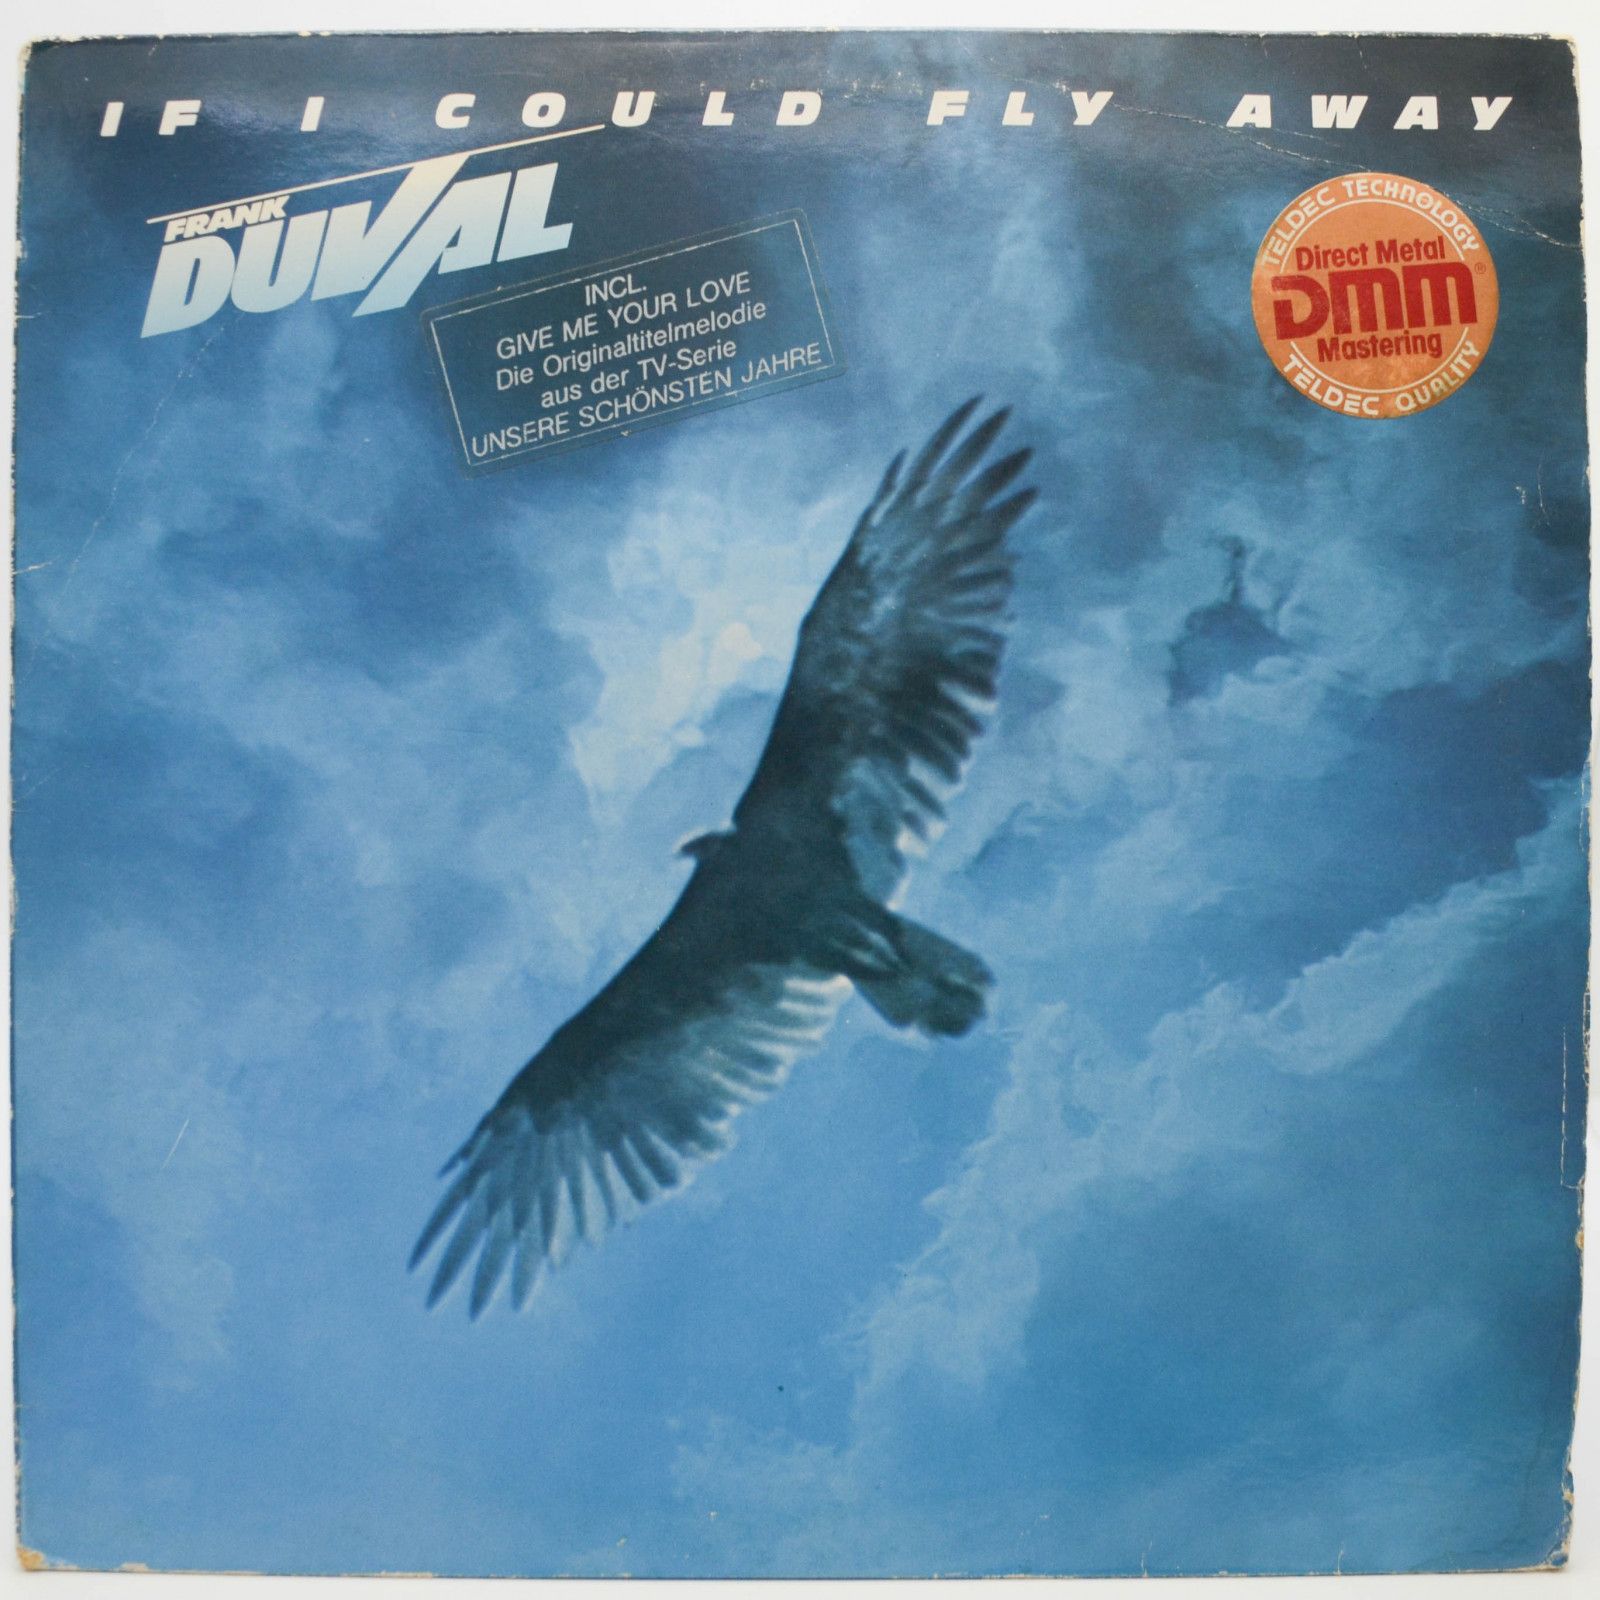 Frank Duval — If I Could Fly Away, 1983